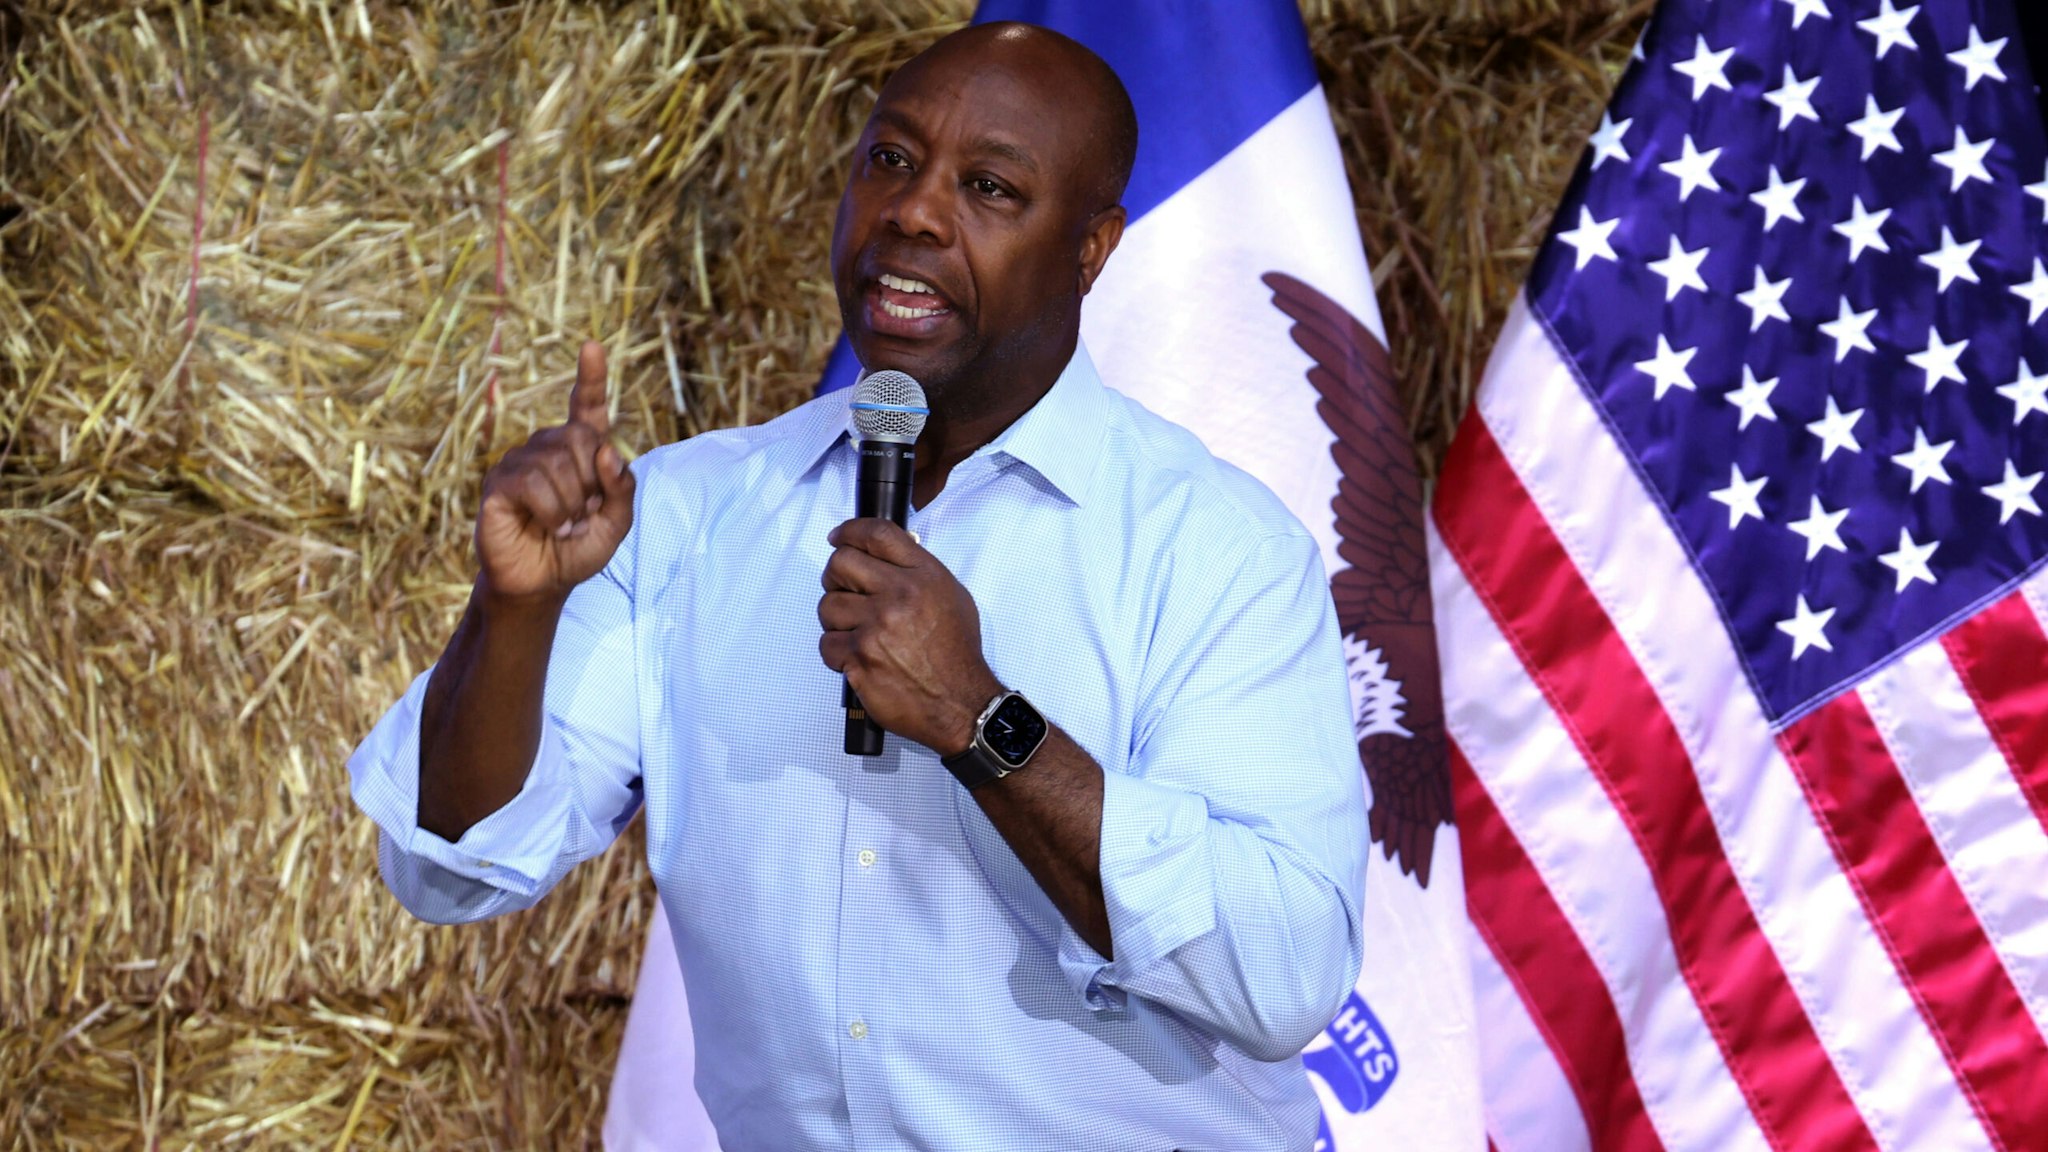 DES MOINES, IOWA - JUNE 03: Republican presidential candidate Senator Tim Scott (R-SC) speaks to guest during the Joni Ernst's Roast and Ride event on June 03, 2023 in Des Moines, Iowa. The annual event helps to raise money for veteran charities and highlight Republican candidates and platforms.